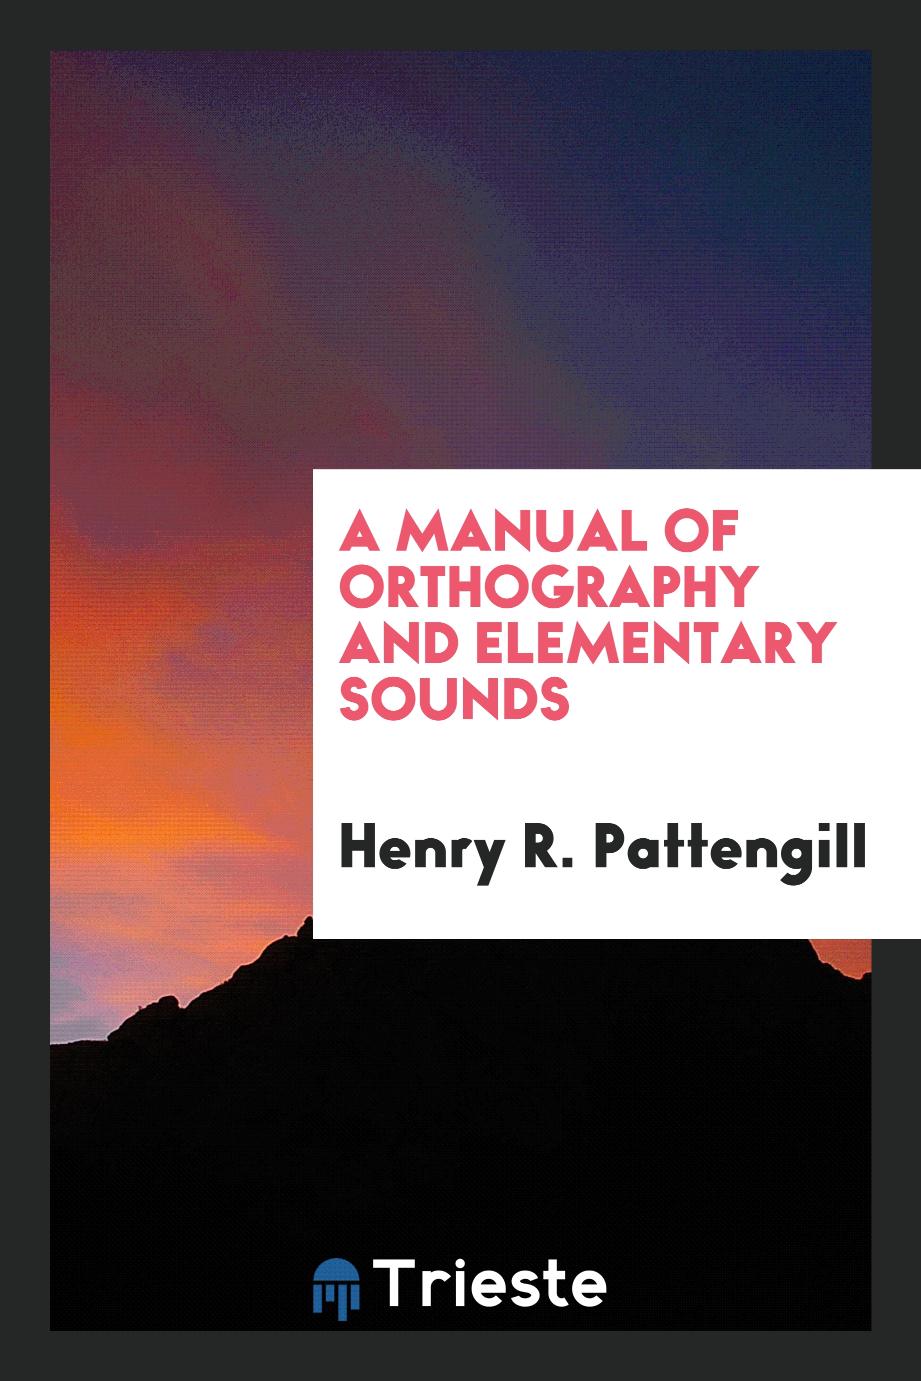 A Manual of Orthography and Elementary Sounds